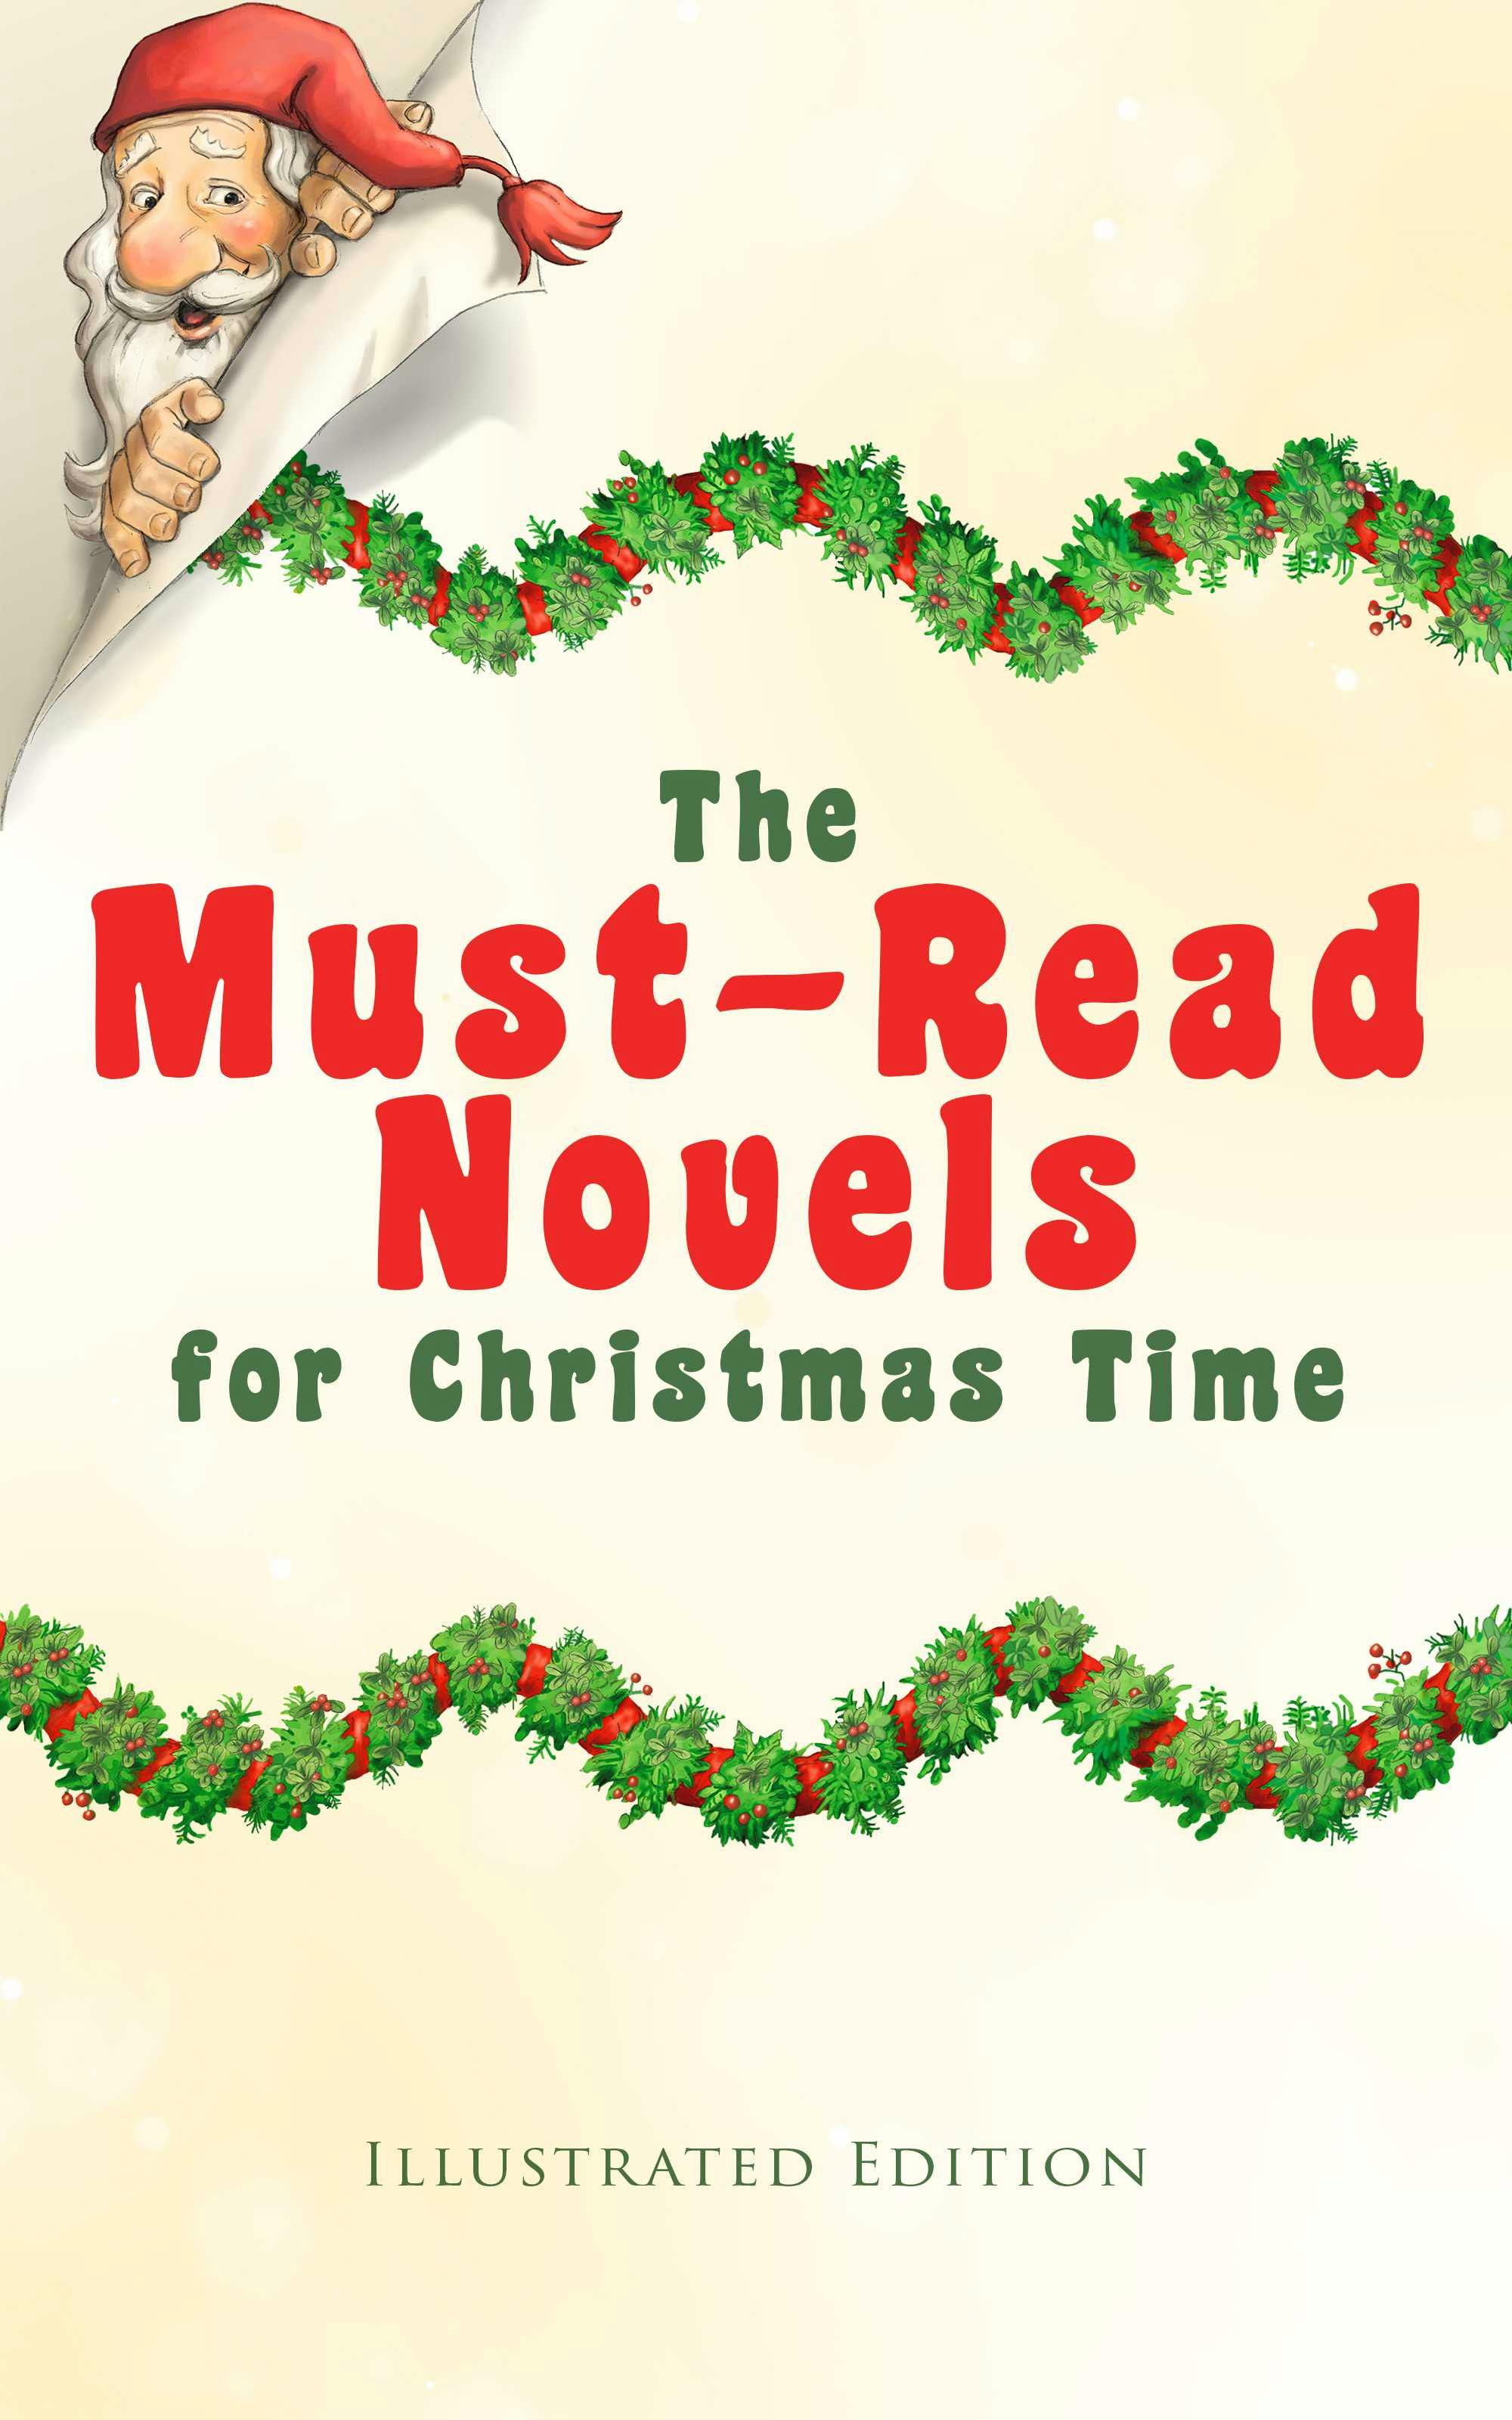 The Must-Read Novels for Christmas Time (Illustrated Edition): The Wonderful Life, Little Women, Life and Adventures of Santa Claus, The Christmas Angel, The Little City of Hope, Anne of Green Gables, Little Lord Fauntleroy, Peter Pan… - Beatrix Potter, Mary Louisa Molesworth, Annie F. Johnston, Abbie Farwell Brown, Martha Finley, L. Frank Baum, Ernest Ingersoll, Amy Ella Blanchard, Max Brand, Kenneth Grahame, George MacDonald, Frances Browne, James Lane Allen, Kate Douglas Wiggin, Louisa May Alcott, Charles Dickens, June Isle, J. M. Barrie, Lucy Maud Montgomery, Lucas Malet, Juliana Horatia Ewing, Sophie May, Frances Hodgson Burnett, Anna Sewell, Florence L. Barclay, Hesba Stretton, Eleanor H. Porter, Amanda M. Douglas, Thomas Nelson Page, A. S. Boyd, Alice Hale Burnett, Edward A. Rand, Jacob A. Riis, F. Marion Crawford